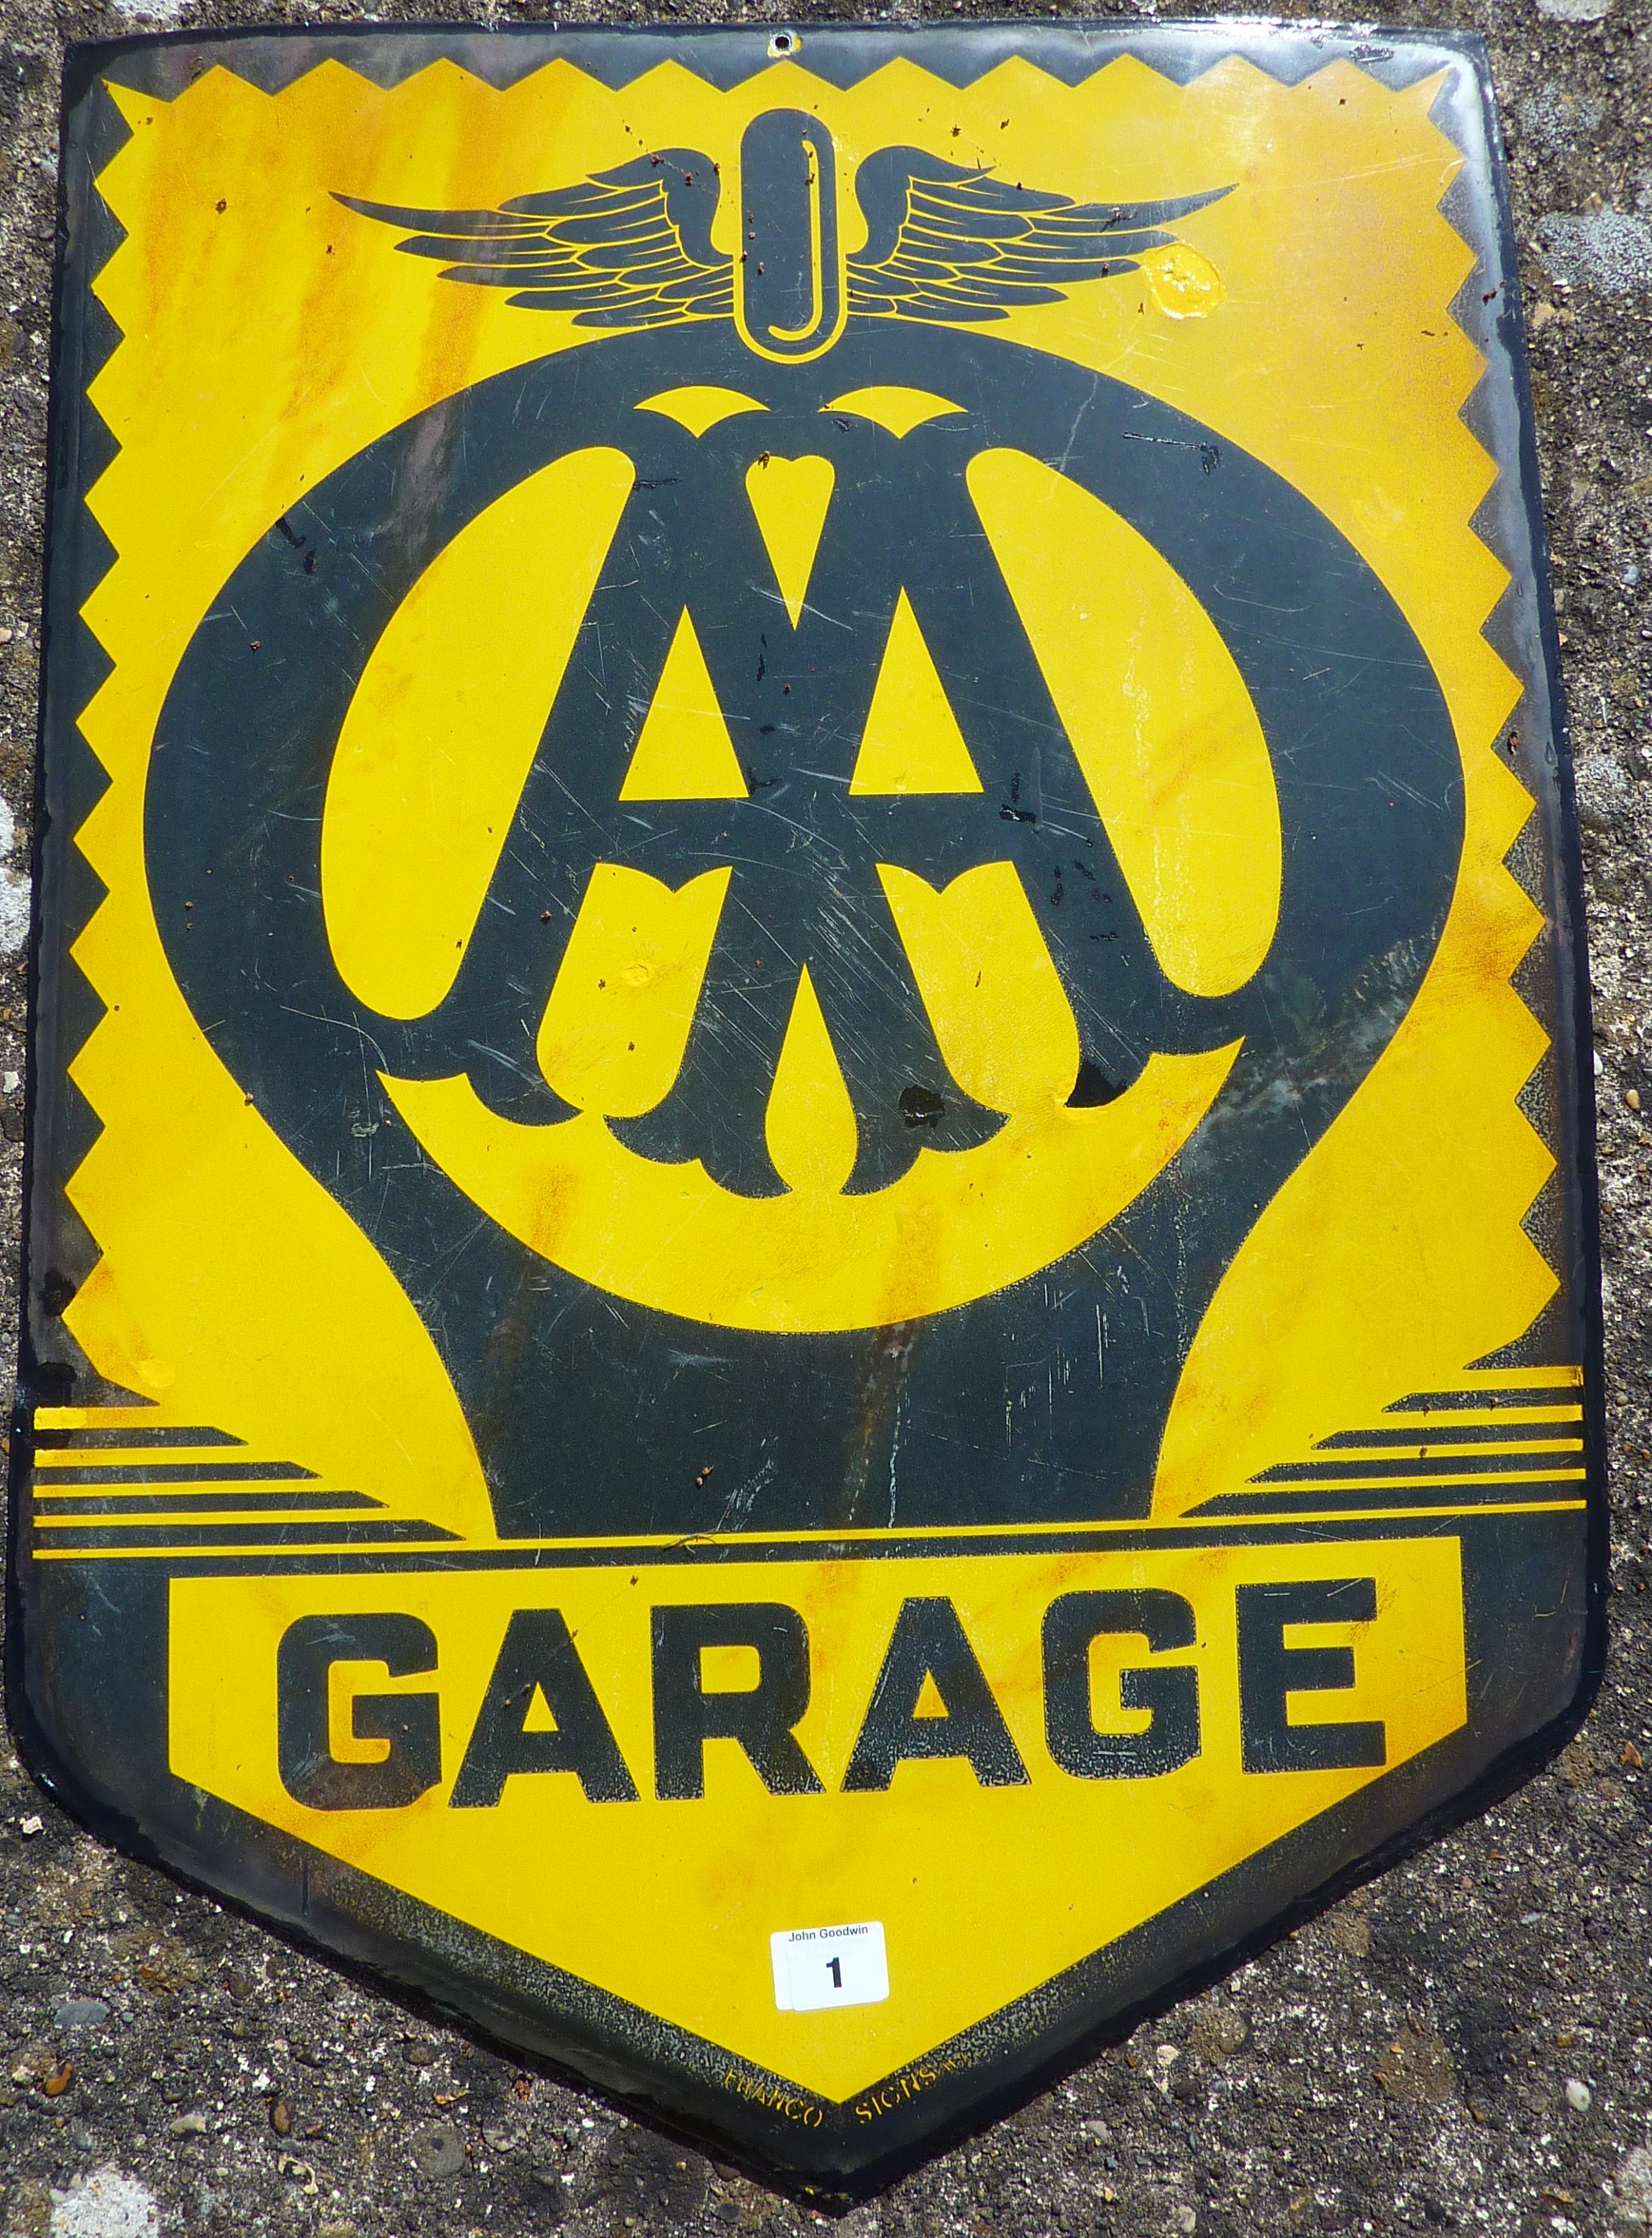 ENAMEL ADVERTISING SIGN AA GARAGE, APPROX. 22 INS. X 31 INS. SOME TOUCHING, FRANCO